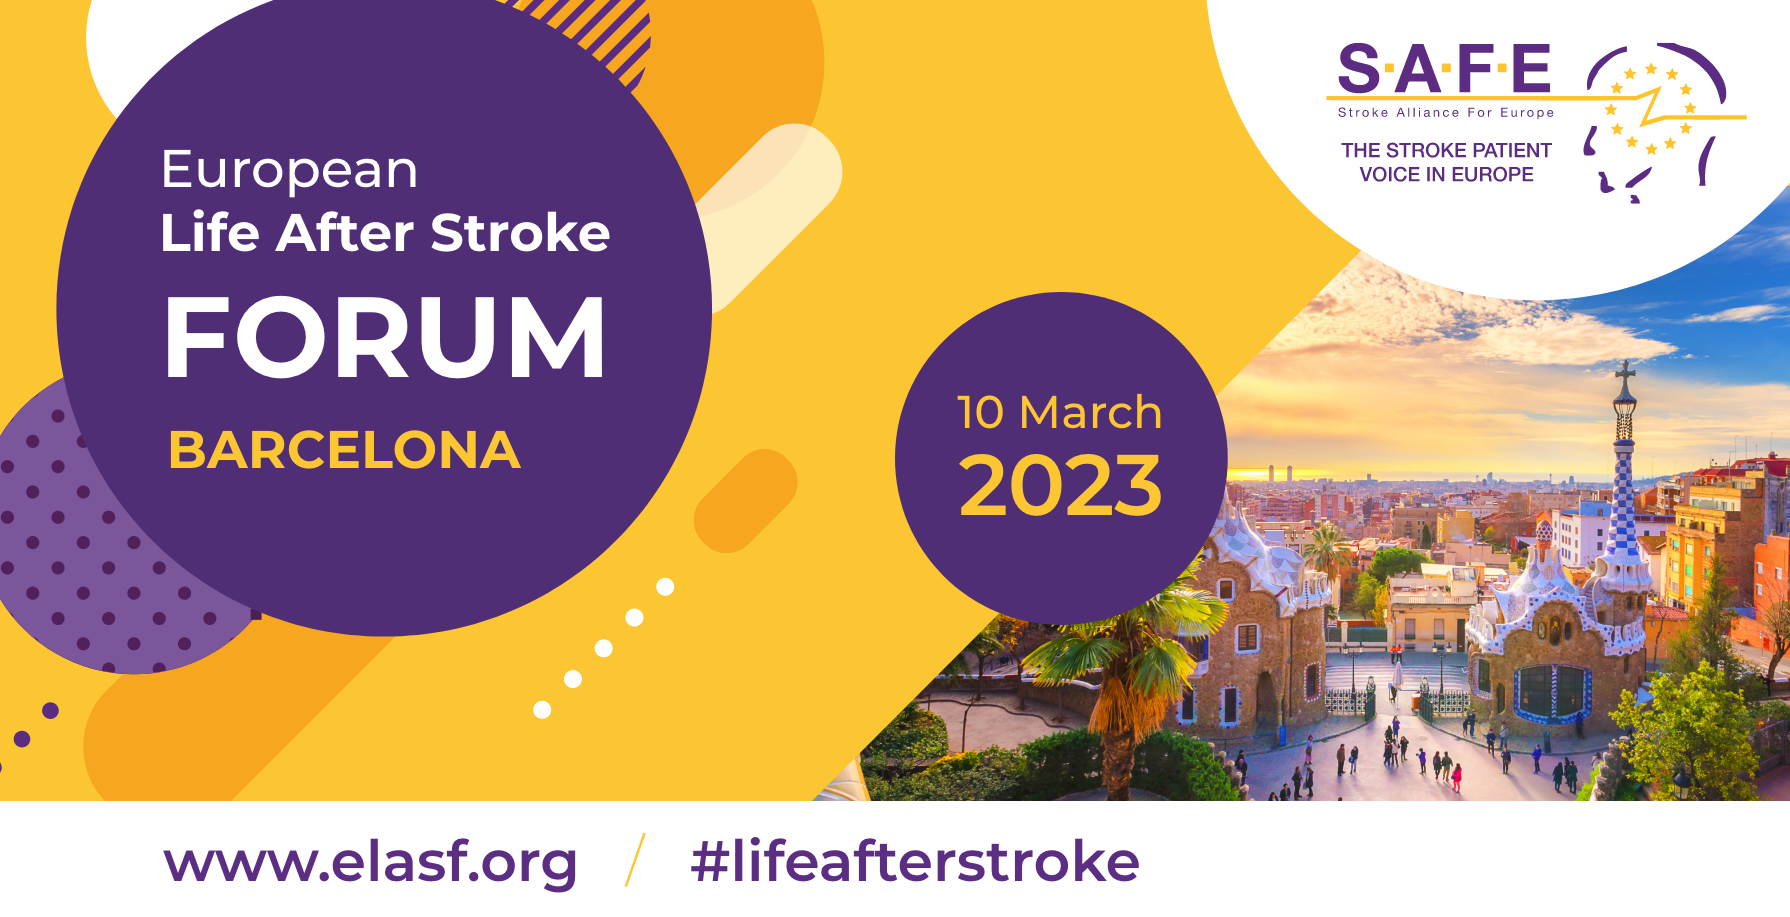 European Life After Stroke Forum – parallel session speakers now confirmed